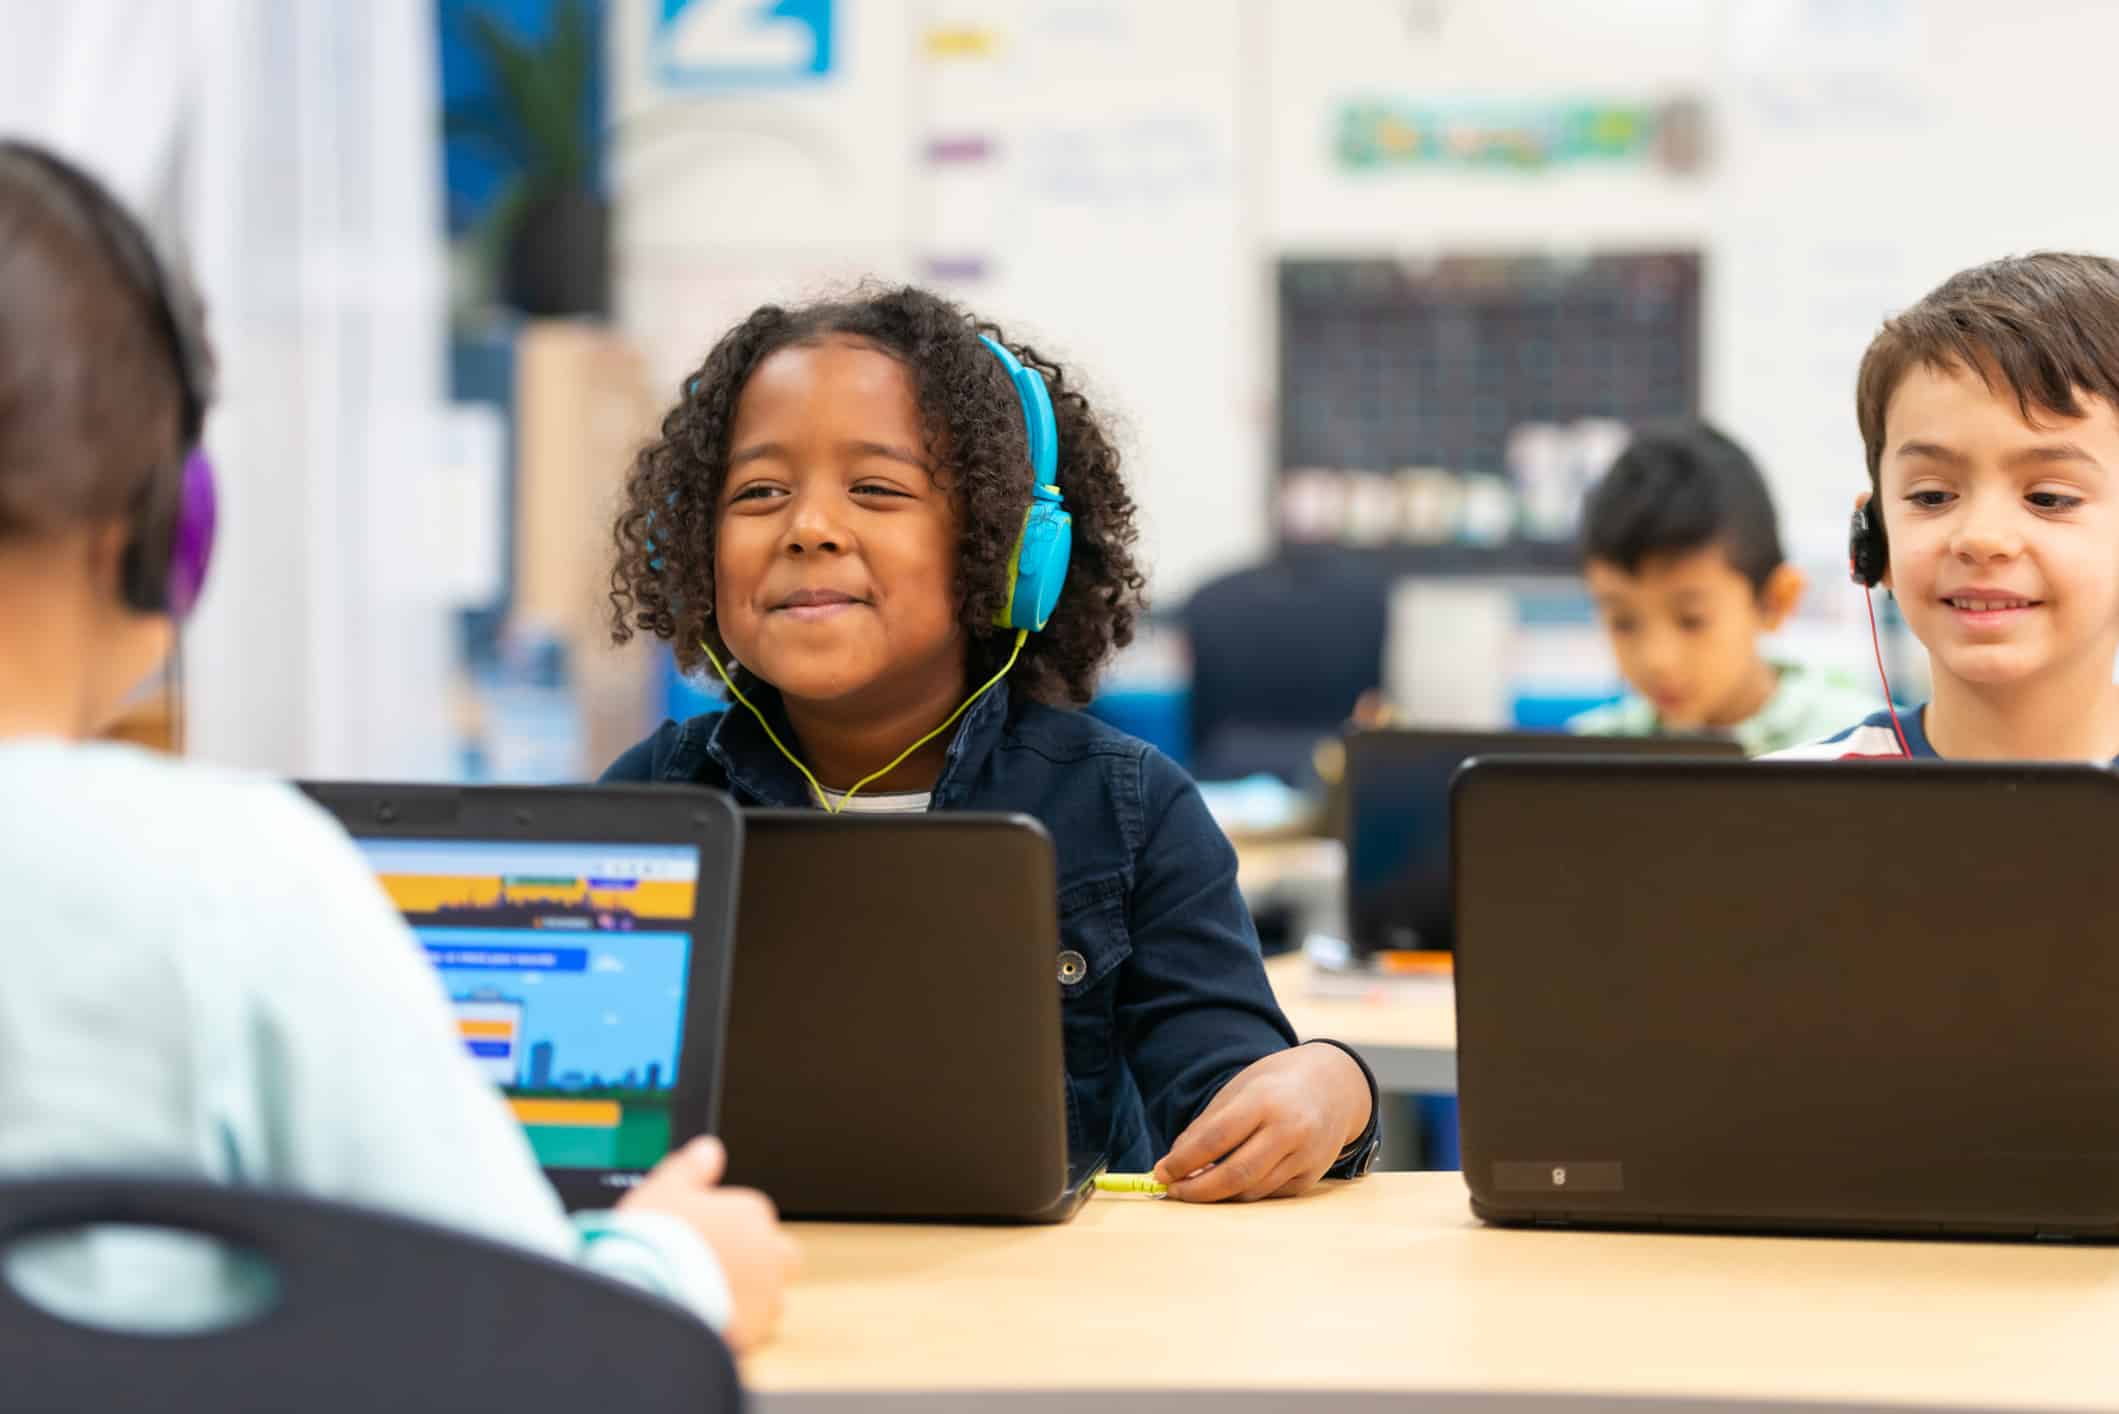 A cute little girl of African descent sits at a computer while learning about some interesting facts. The other students around her do the same, all while wearing headphones.